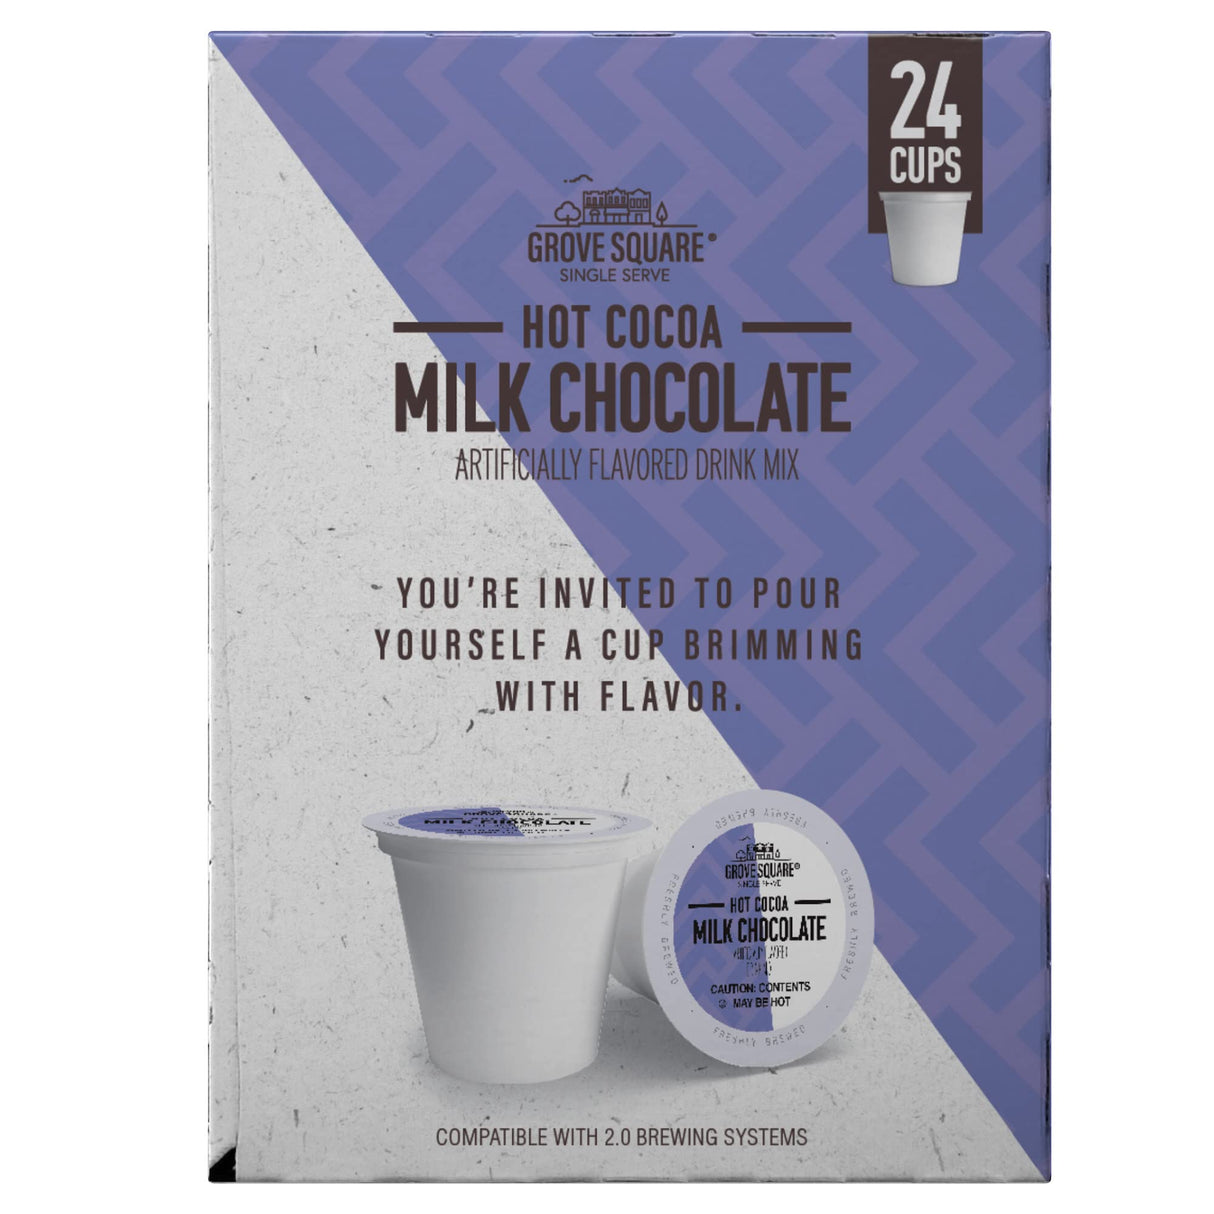 Grove Square Hot Cocoa Pods, Milk Chocolate, Single Serve (Pack of 24) (Packaging May Vary)